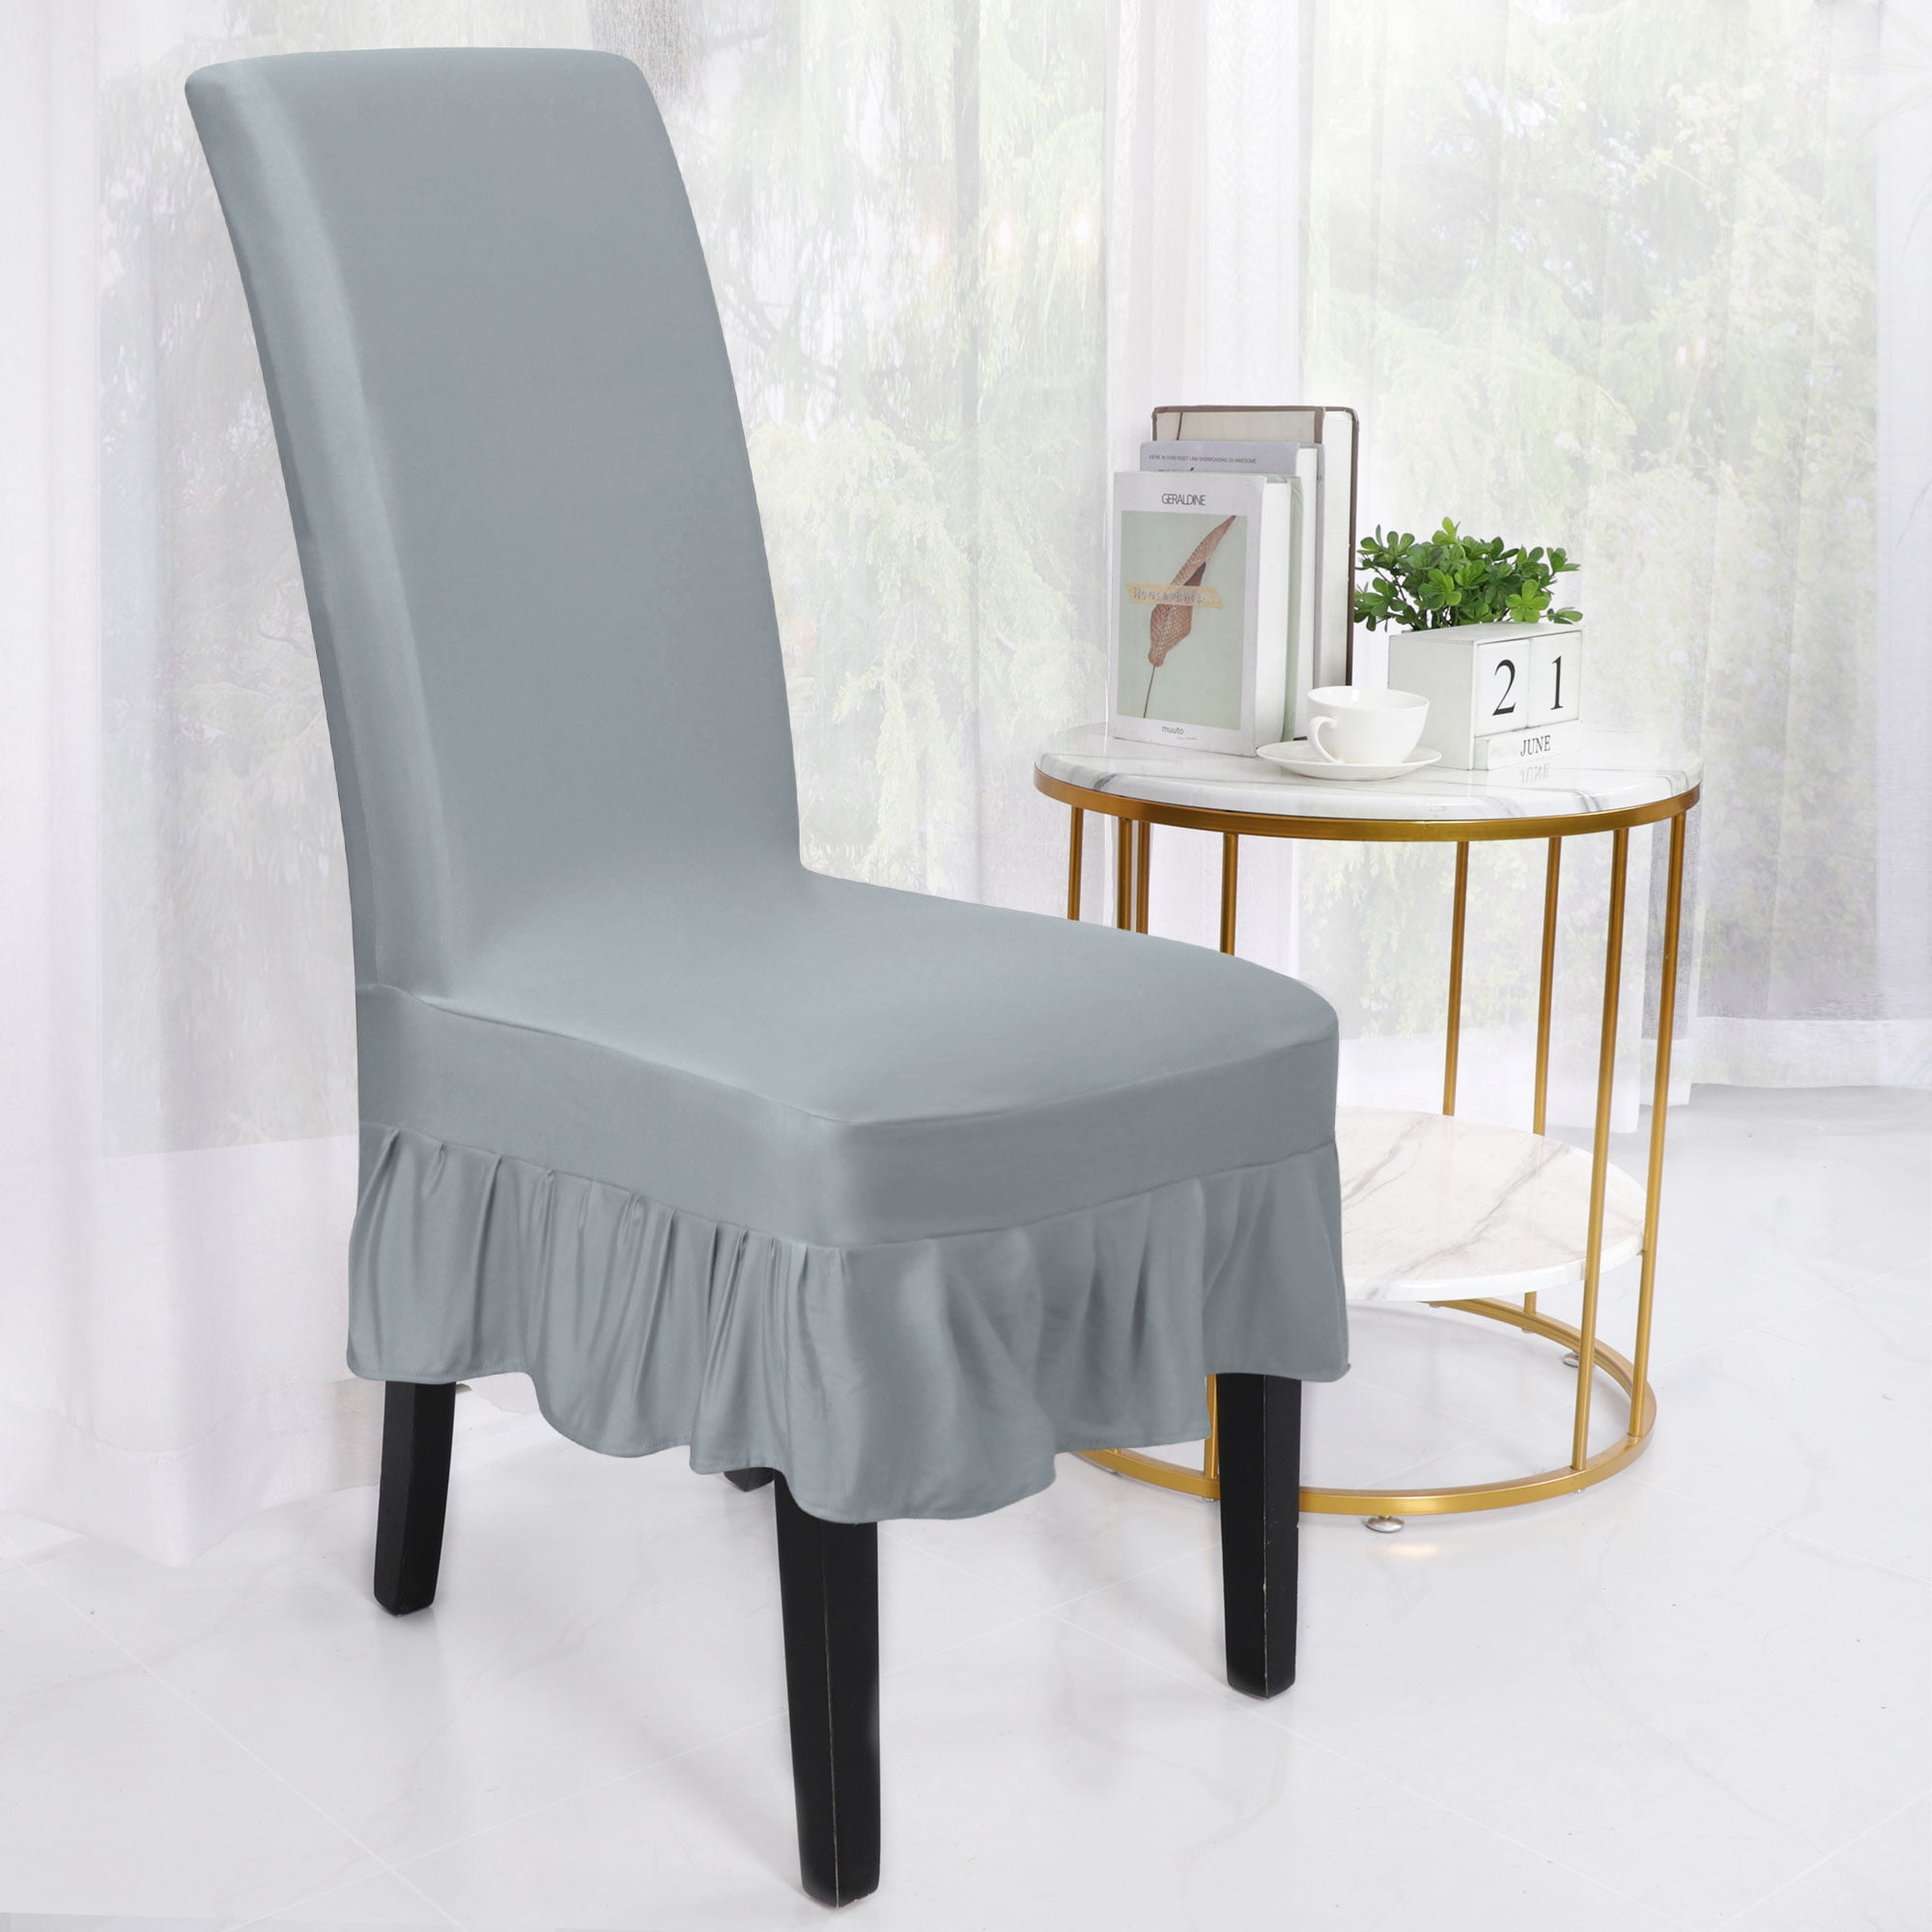 Details about   Waterproof Split Chair Cover Stretch Seat Cover Slipcover Dining Room Supply 